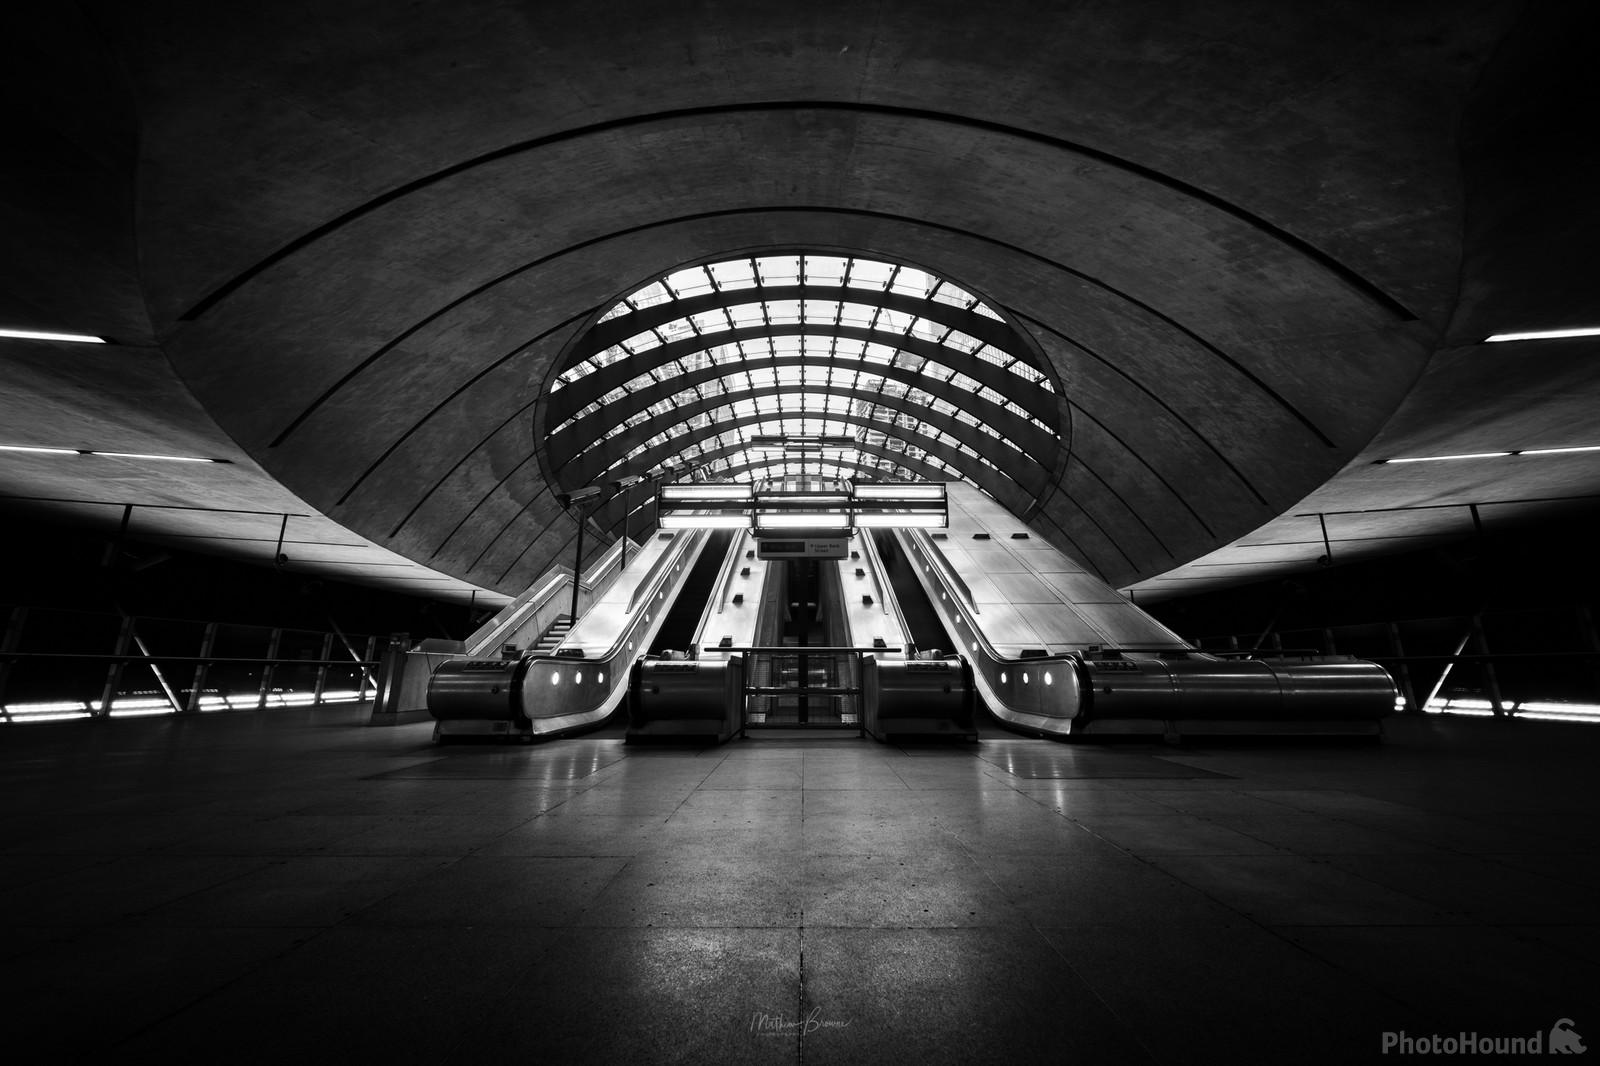 Image of Canary Wharf Underground Station by Mathew Browne